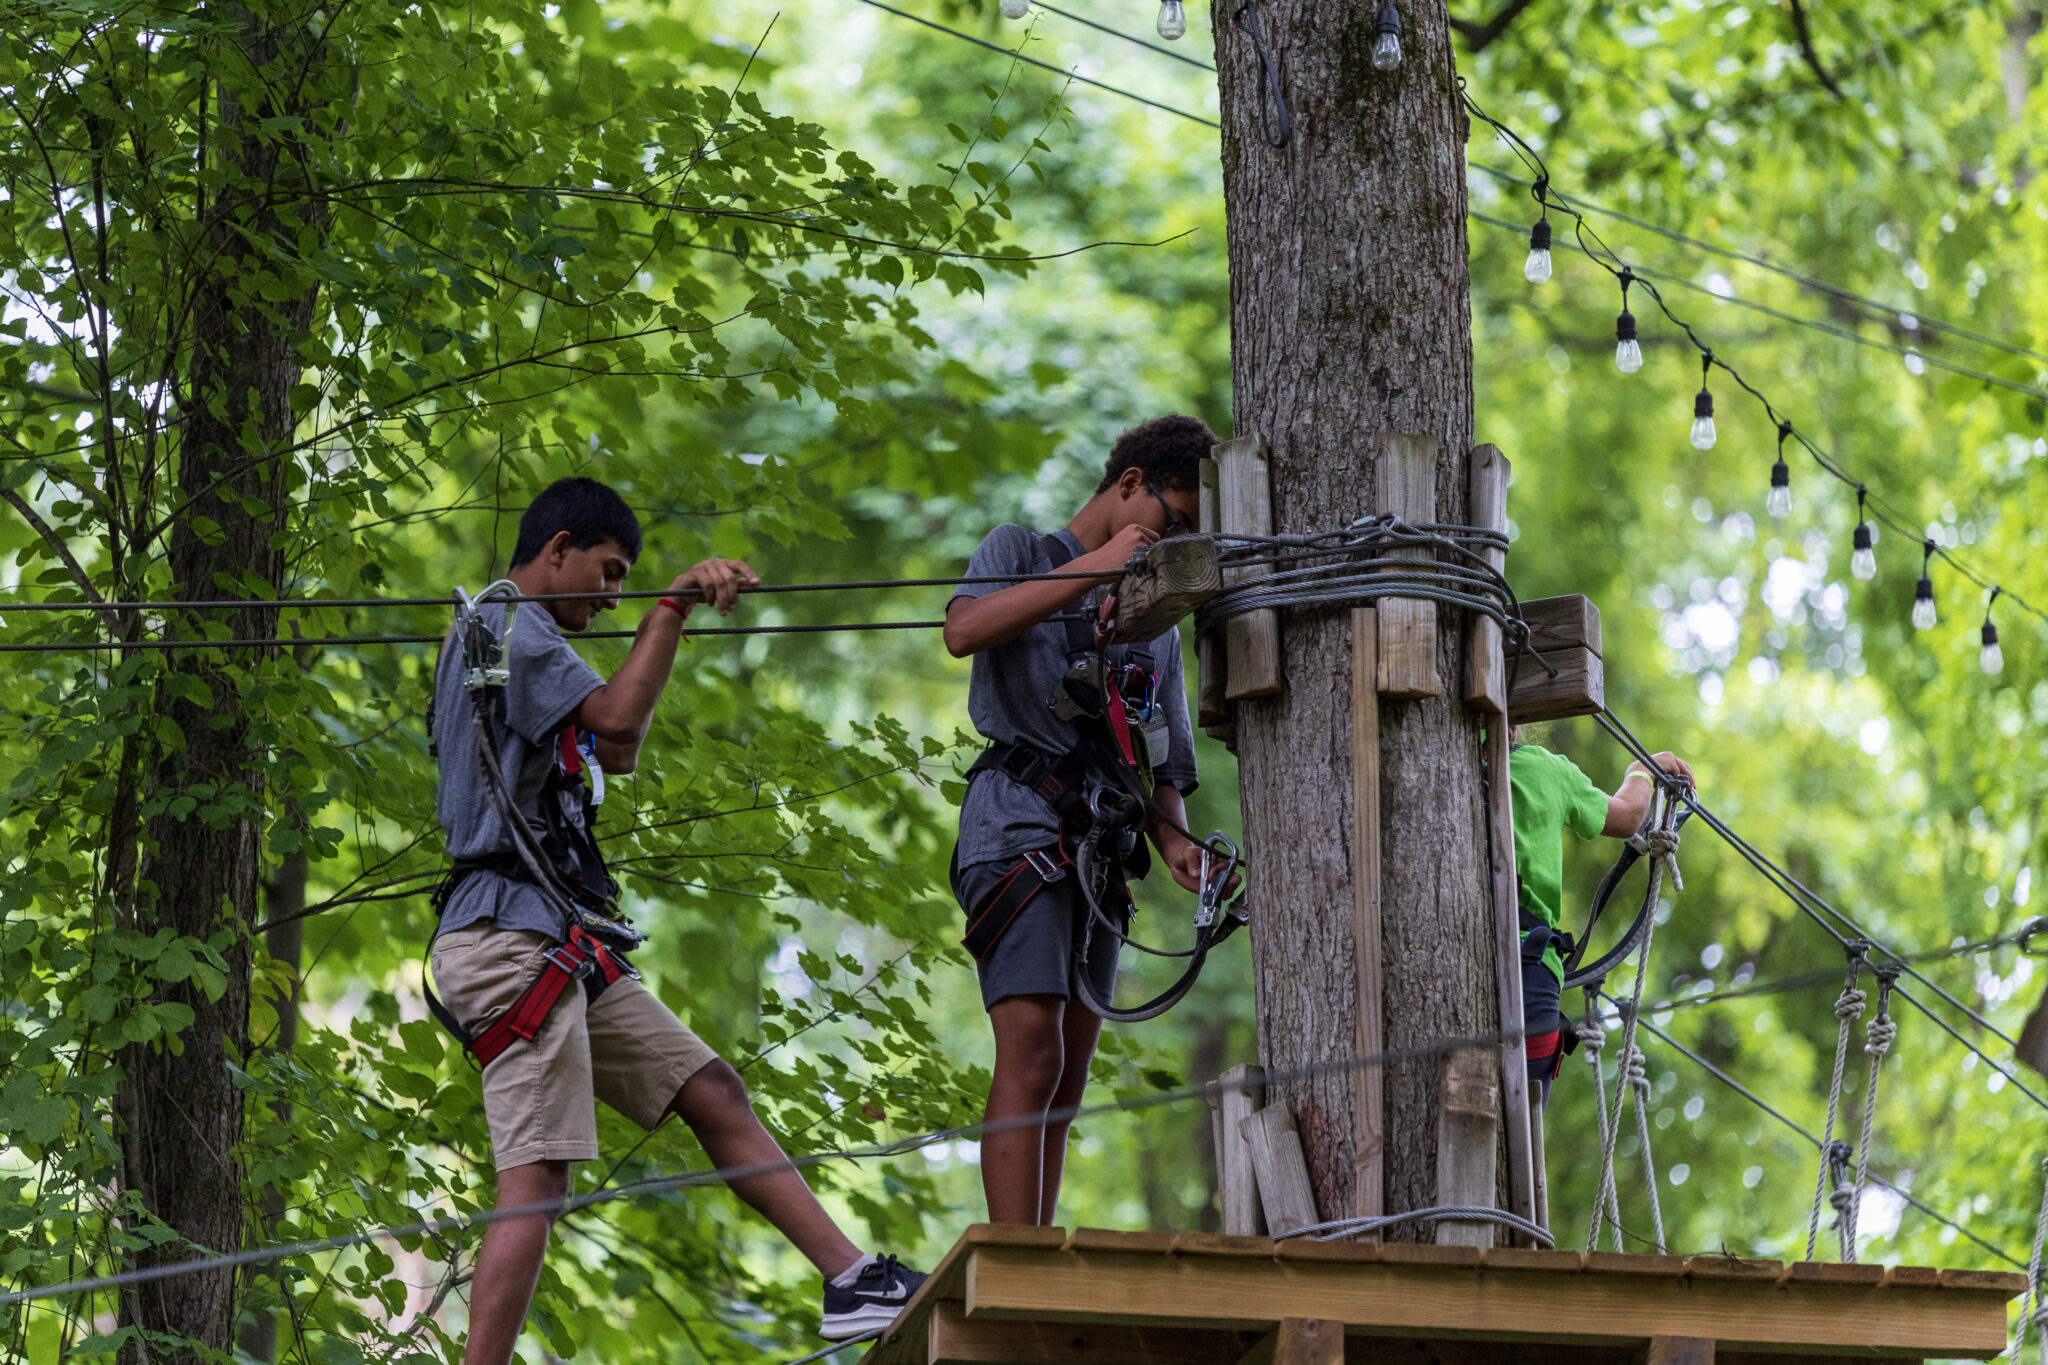 A group of people participating in the P.L.E.D.G.E. Leadership Program on a zip line in the woods.